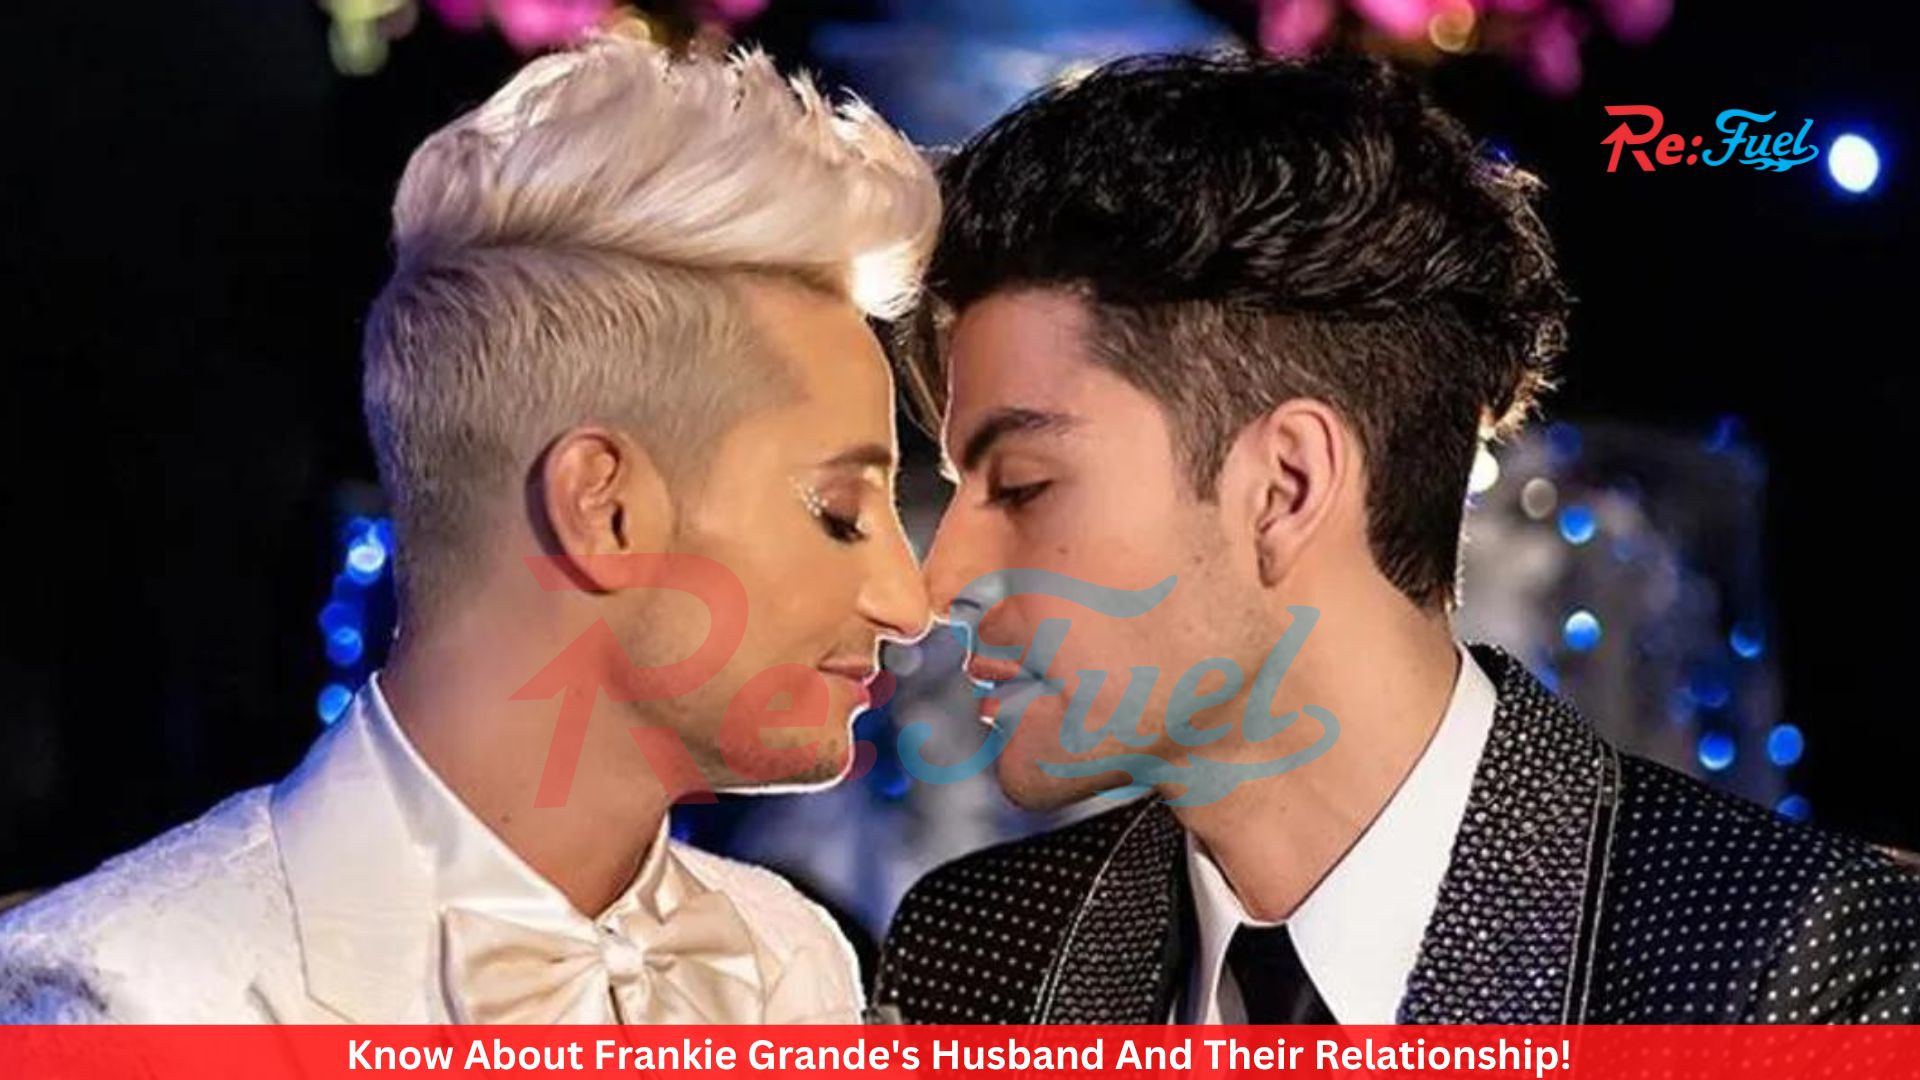 Know About Frankie Grande's Husband And Their Relationship!